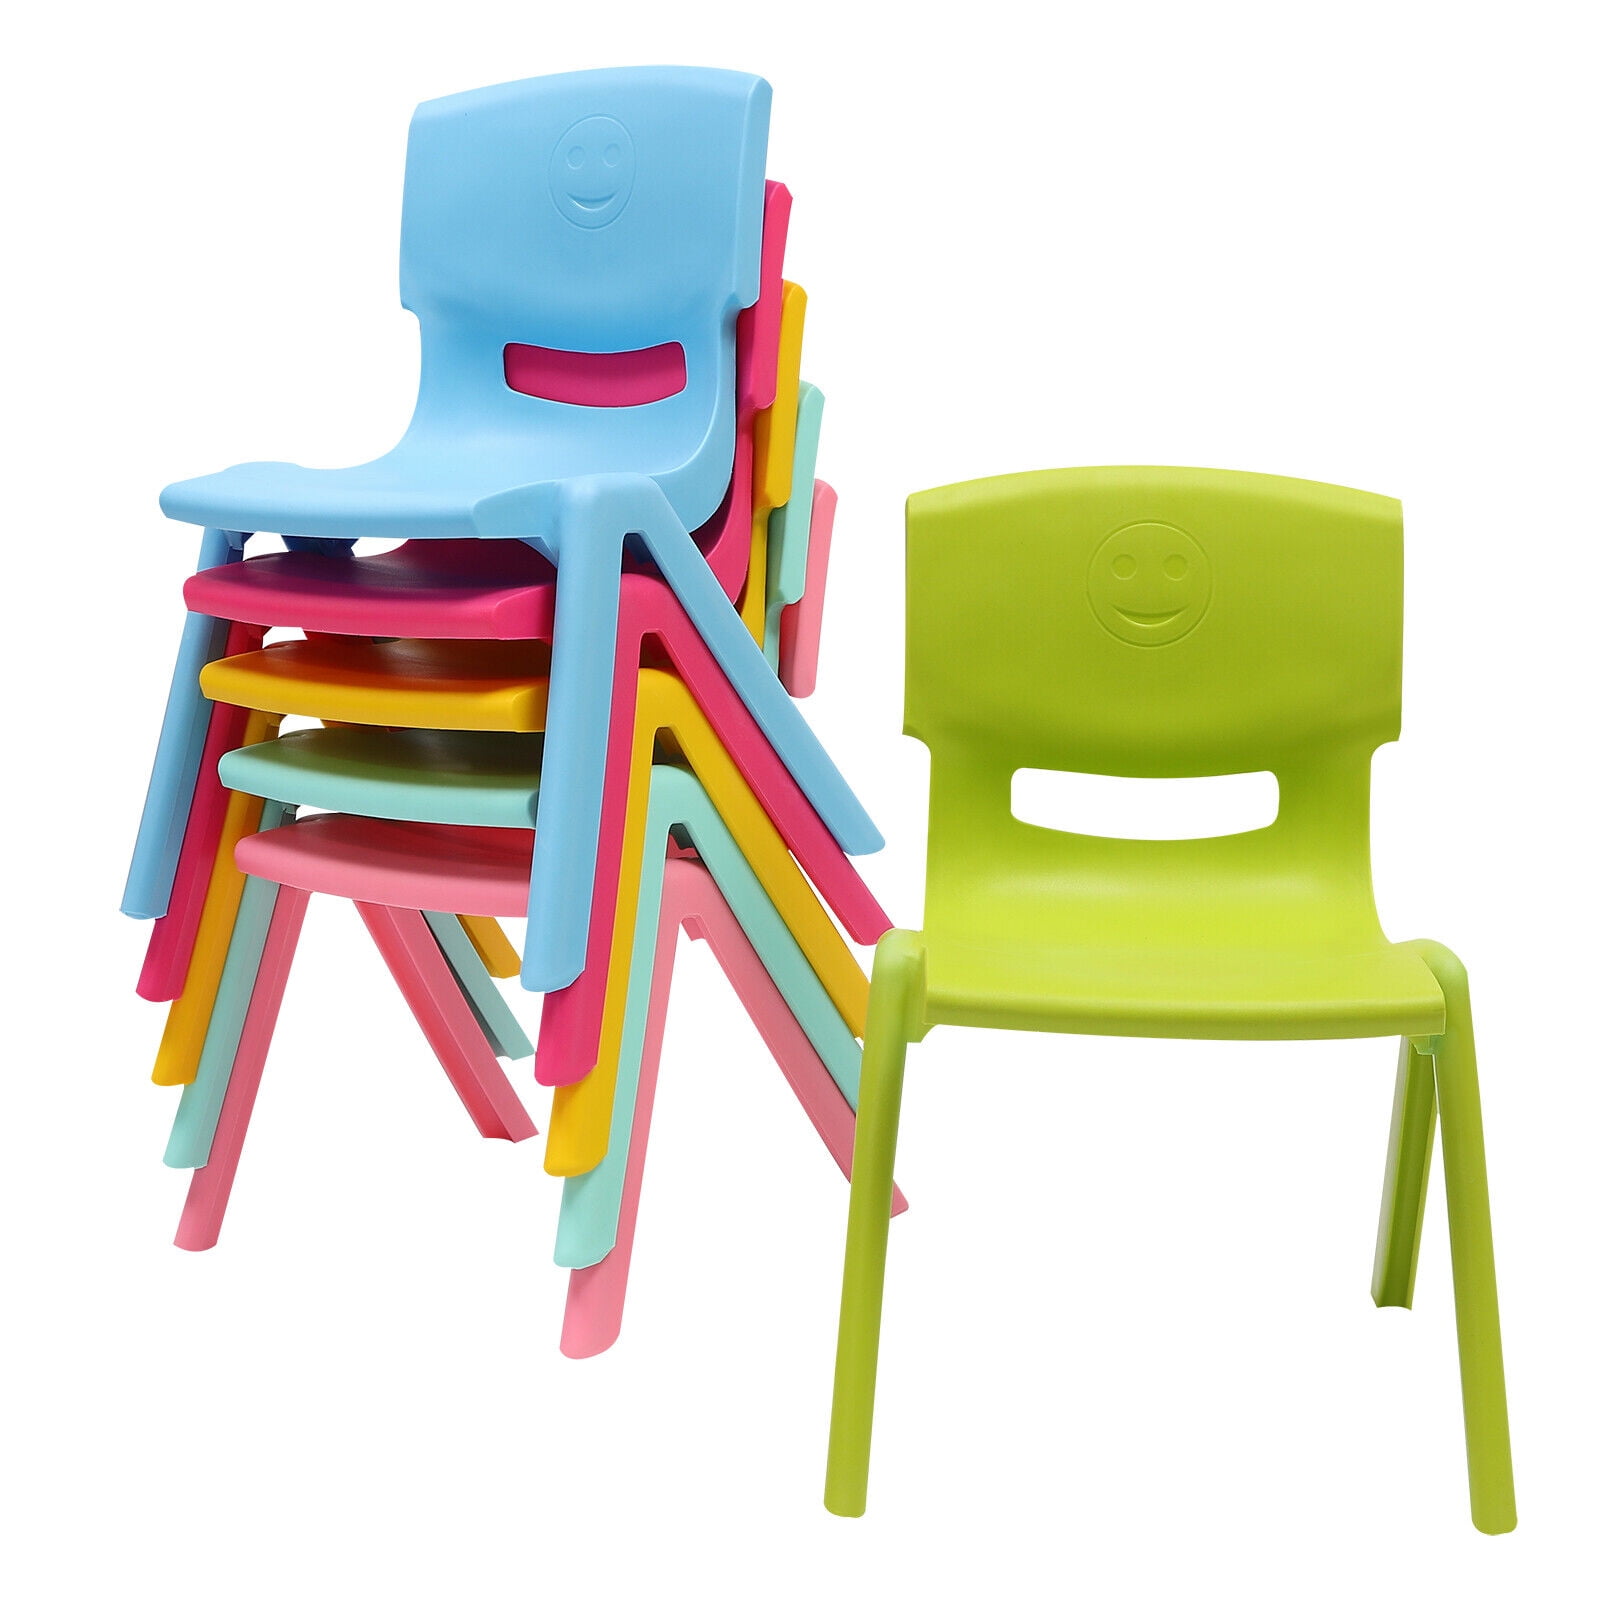 Oukaning 6PCS Colorful School Stackable School Chairs, with 11inch Seat  Height Plastic Classrooms Chairs for Kids Learning Chairs